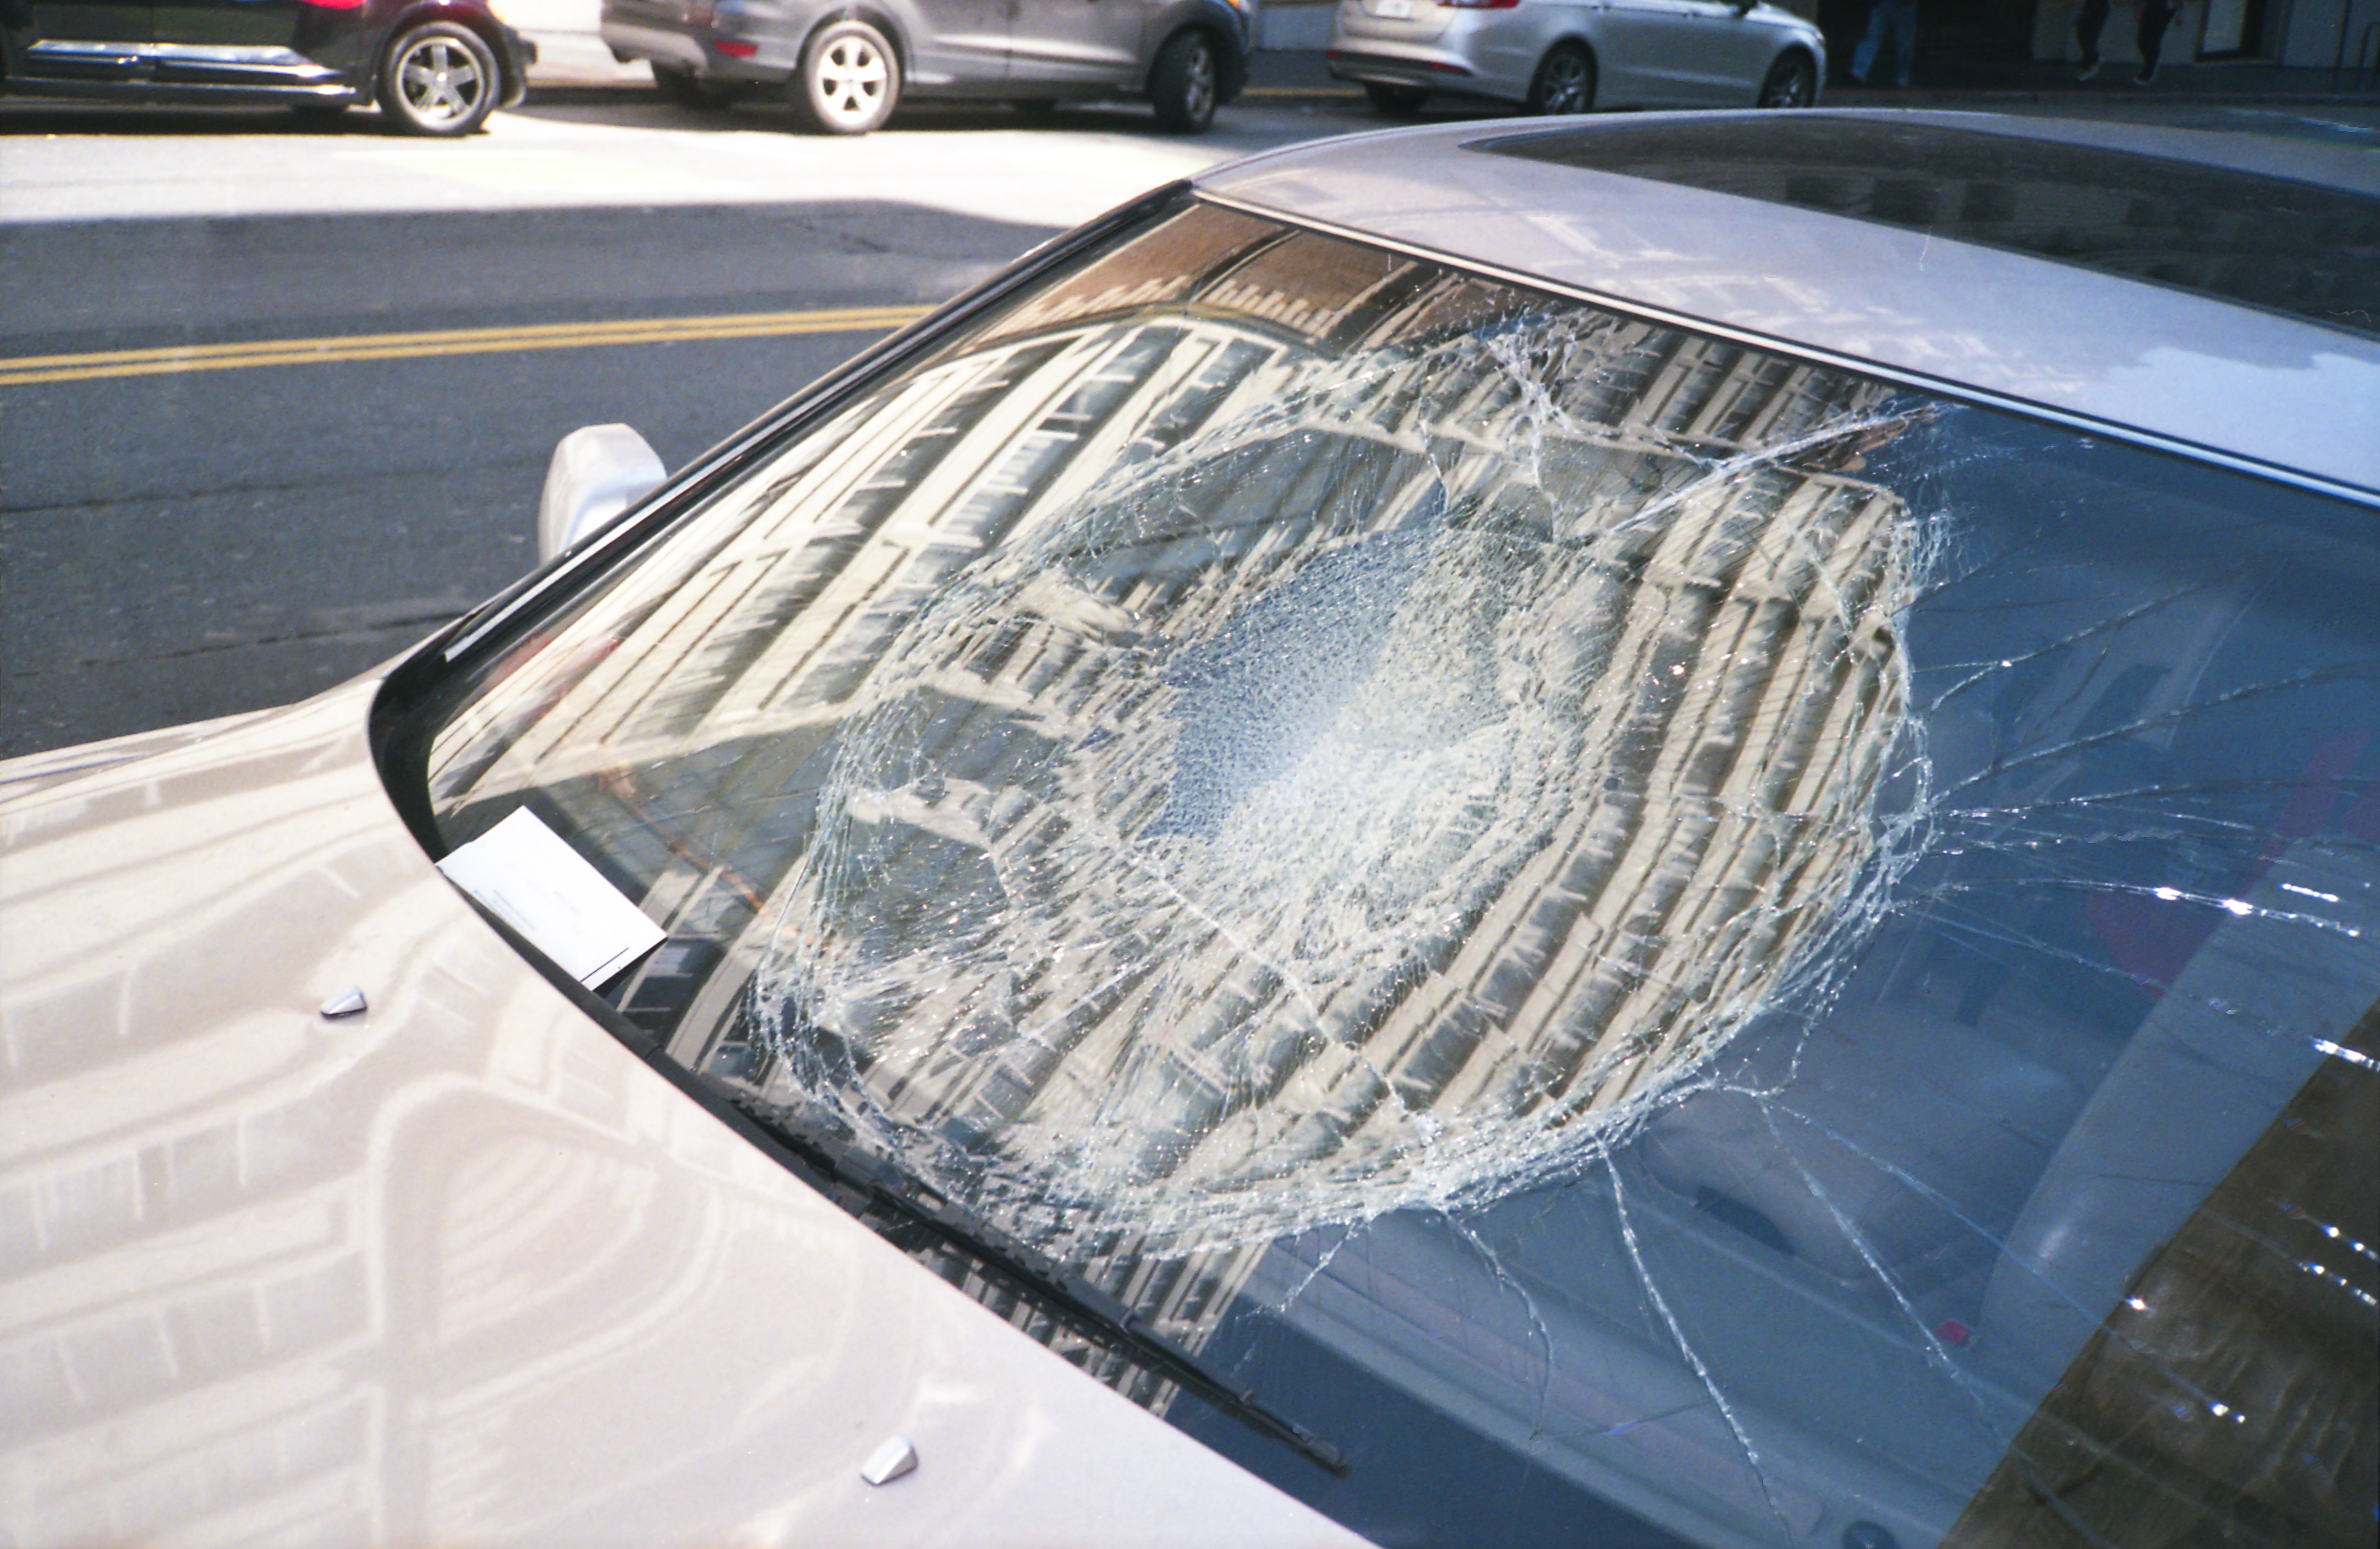 A broken windshield of a car that needs to be repaired.